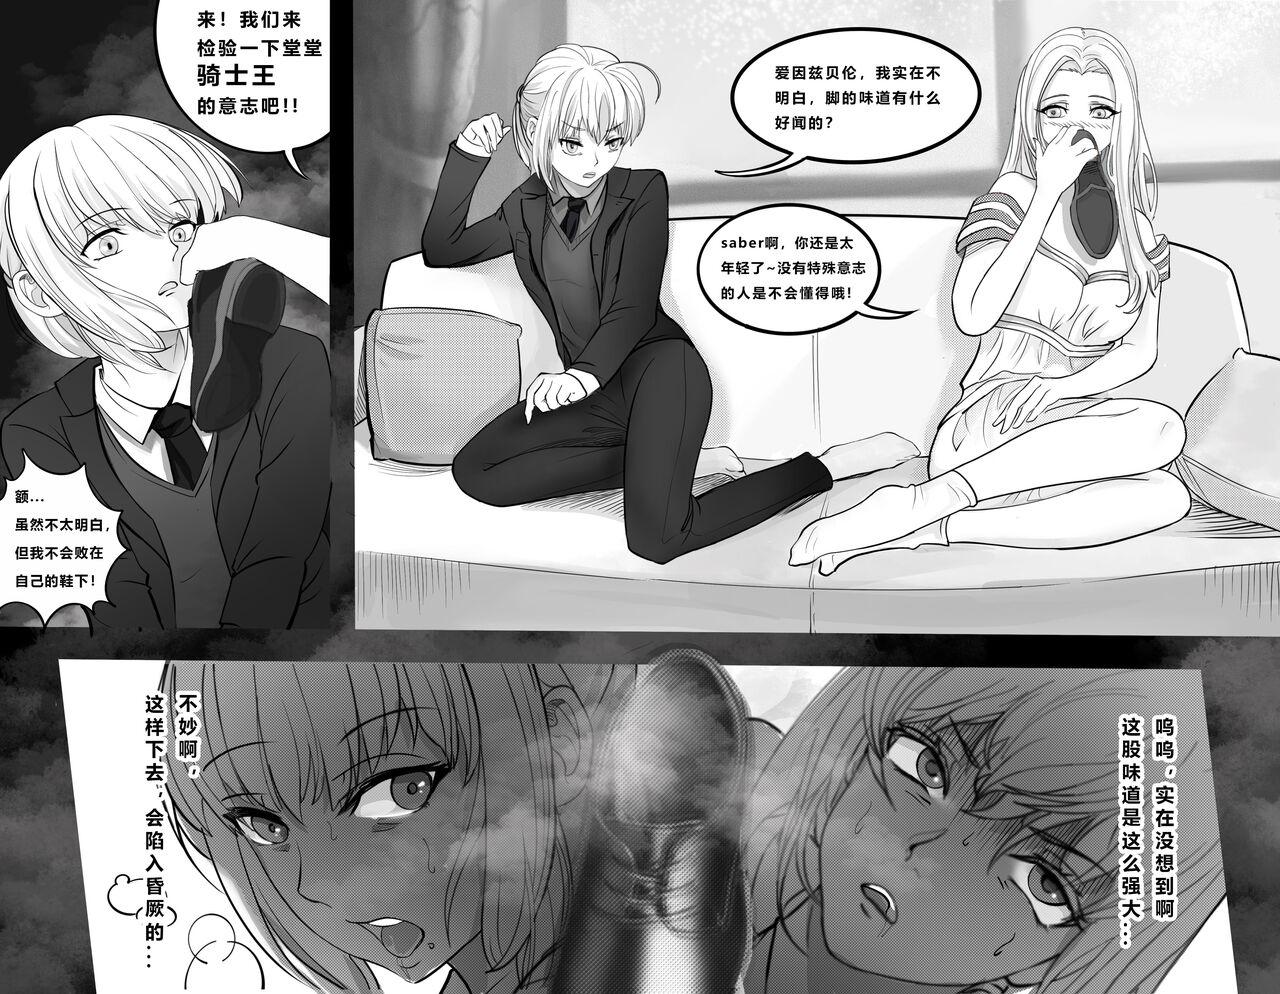 Whipping FATE REQUEST CHINESE VERSION - Fate stay night Big Black Dick - Page 1